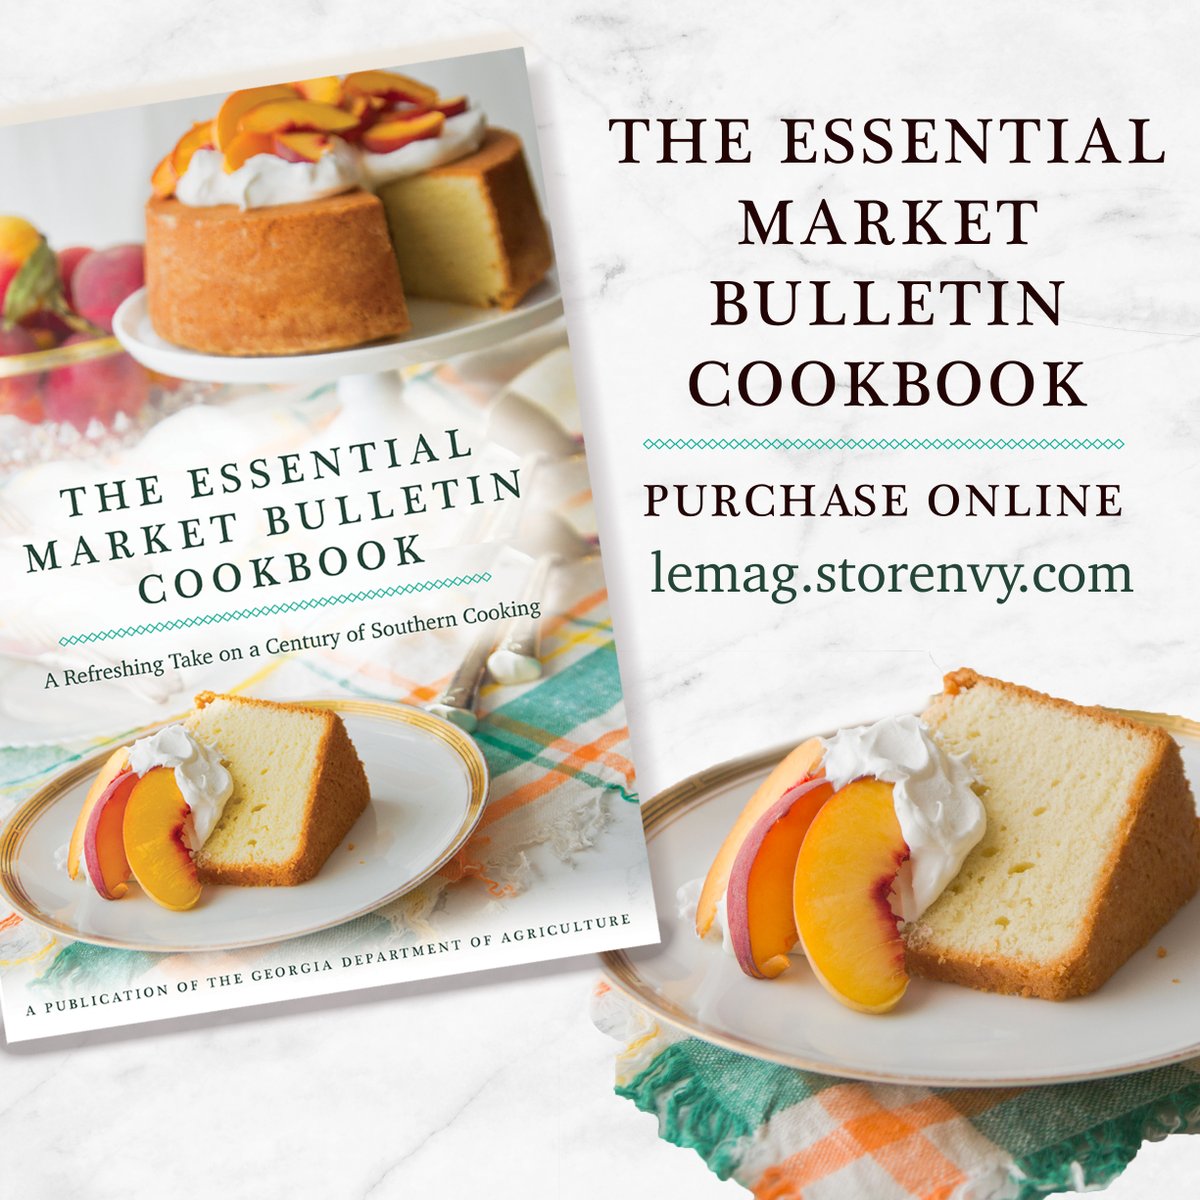 This #WorldBookDay, we want to share the Essential Market Bulletin Cookbook, a resource for both novice & experienced chefs! It's packed with recipes like Smoked Sausage & Turnip Green Cornbread Stuffing Bites & so much more! Get your copy here ⬇️ lemag.storenvy.com